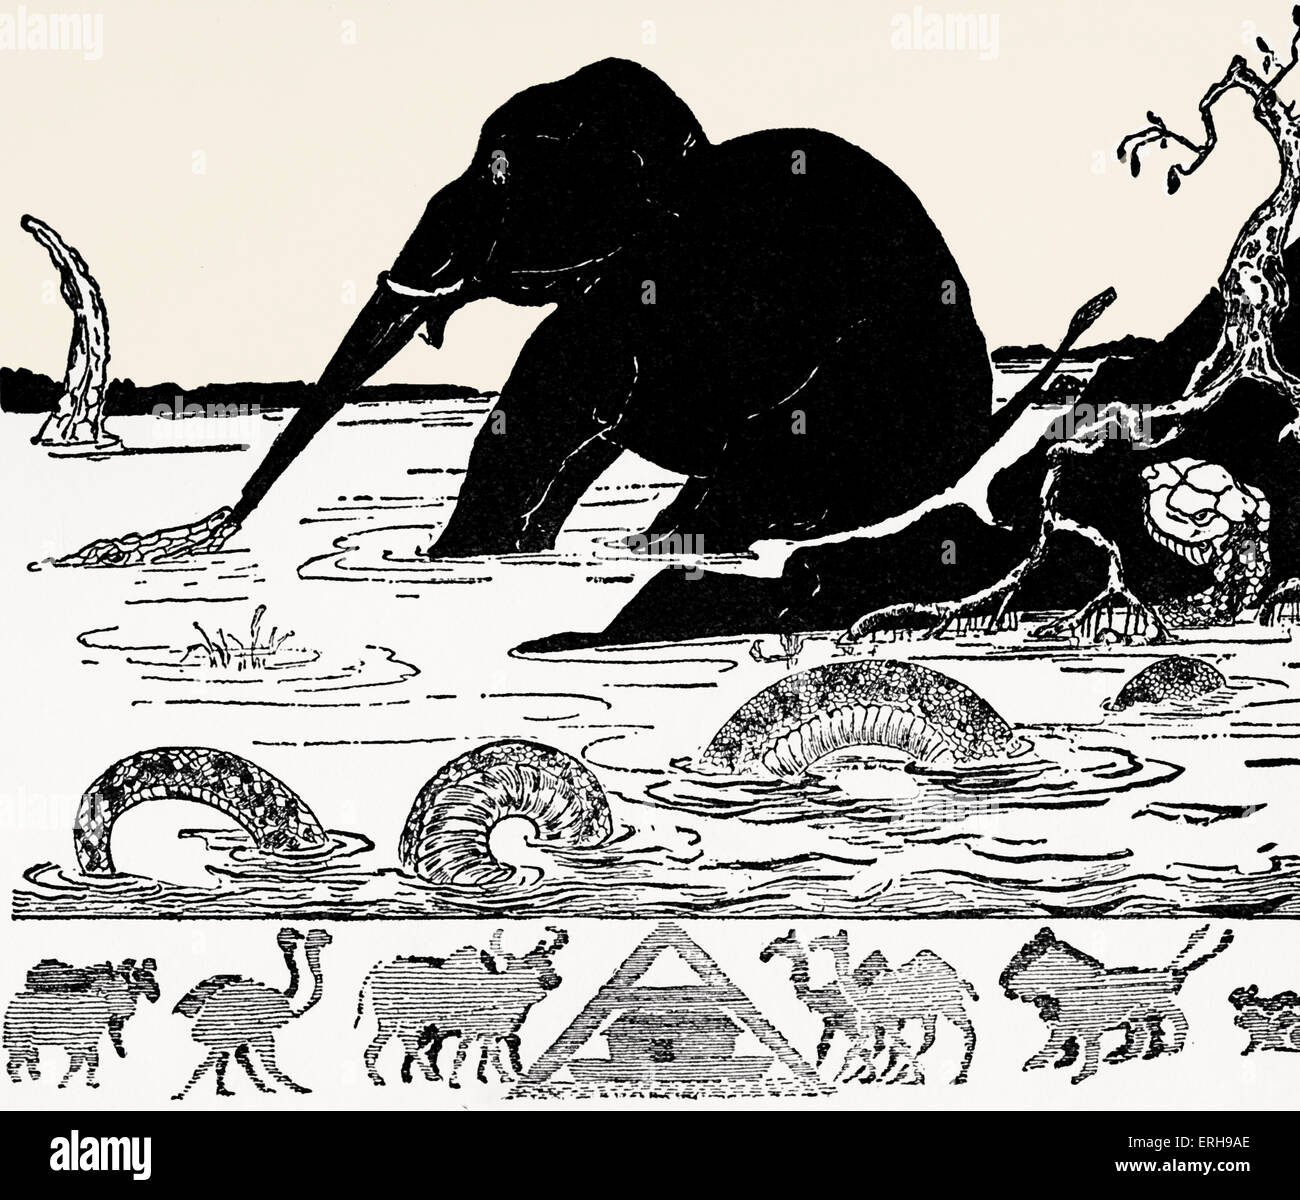 Just So Stories by Rudyard Kipling. The Elephant's Child having his nose  pulled by the crocodile. Black and white illustration Stock Photo - Alamy